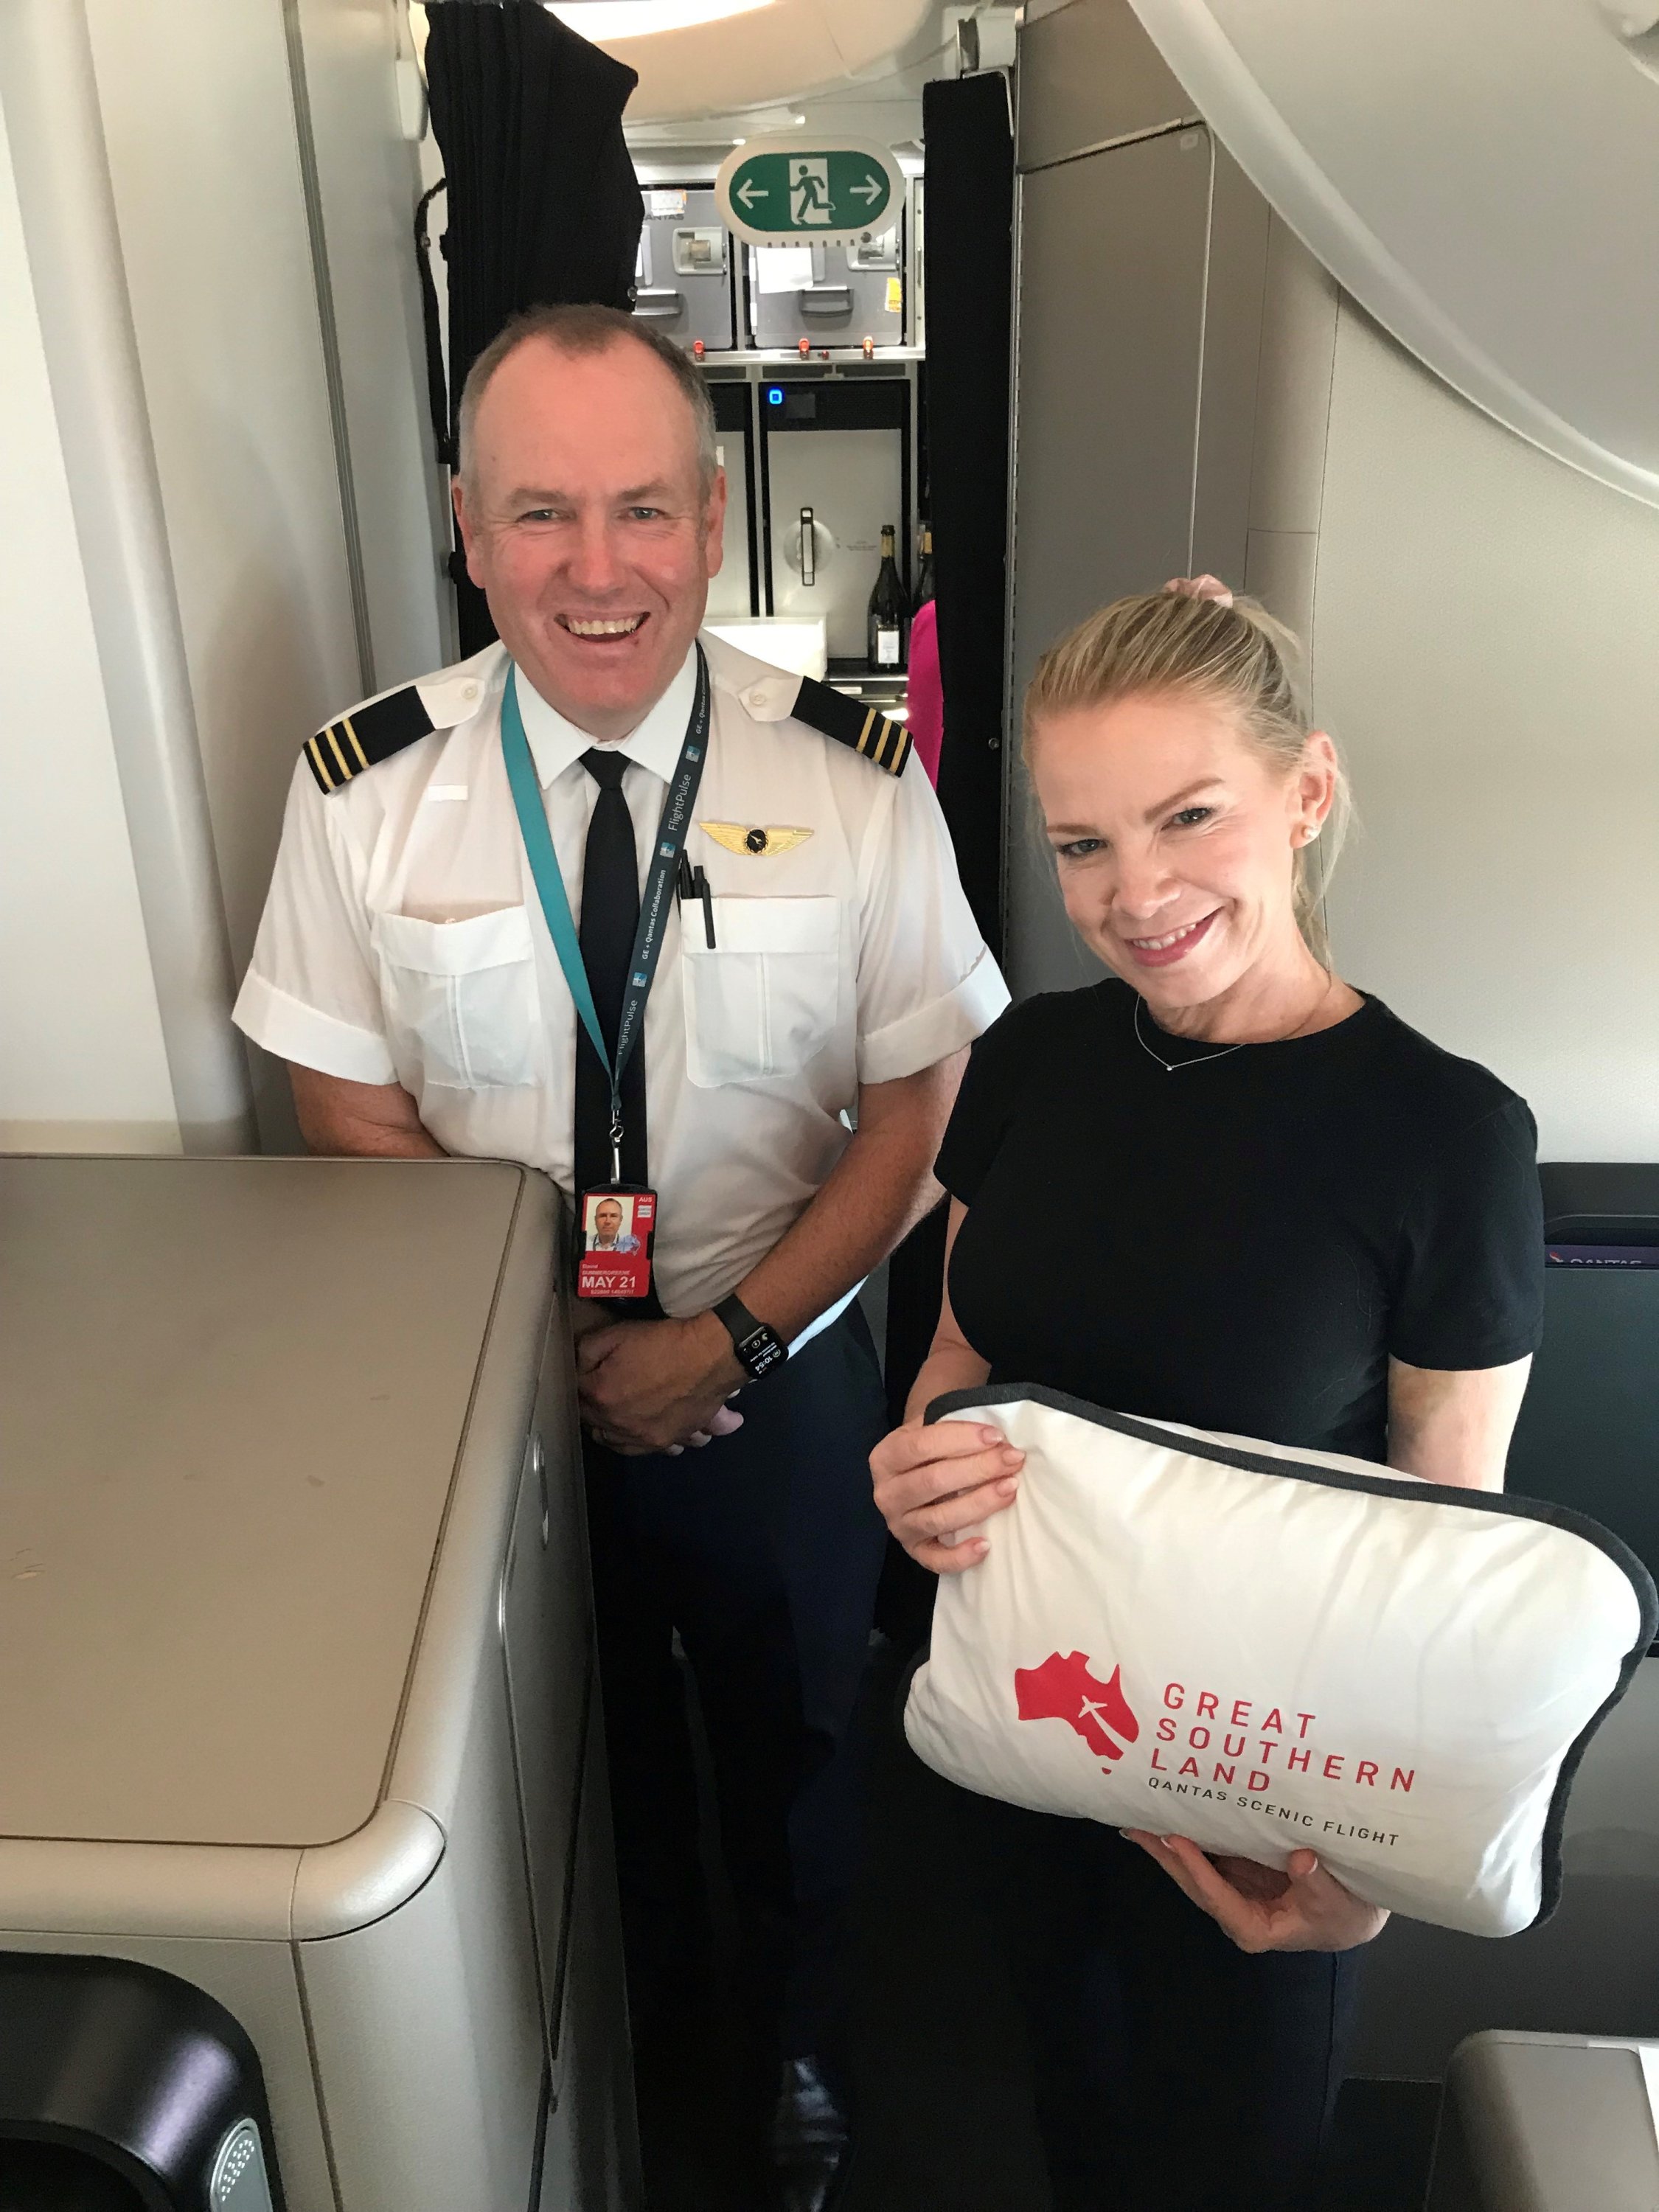 Frequent Flyer Fiona Downes with Qantas Pilot David Summergreene pose for a photo on board the 8-hour Qantas 787 Dreamliner 'Flight to Nowhere' around Australia, Oct. 10, 2020. (Photo by Qantas Airways via Reuters)